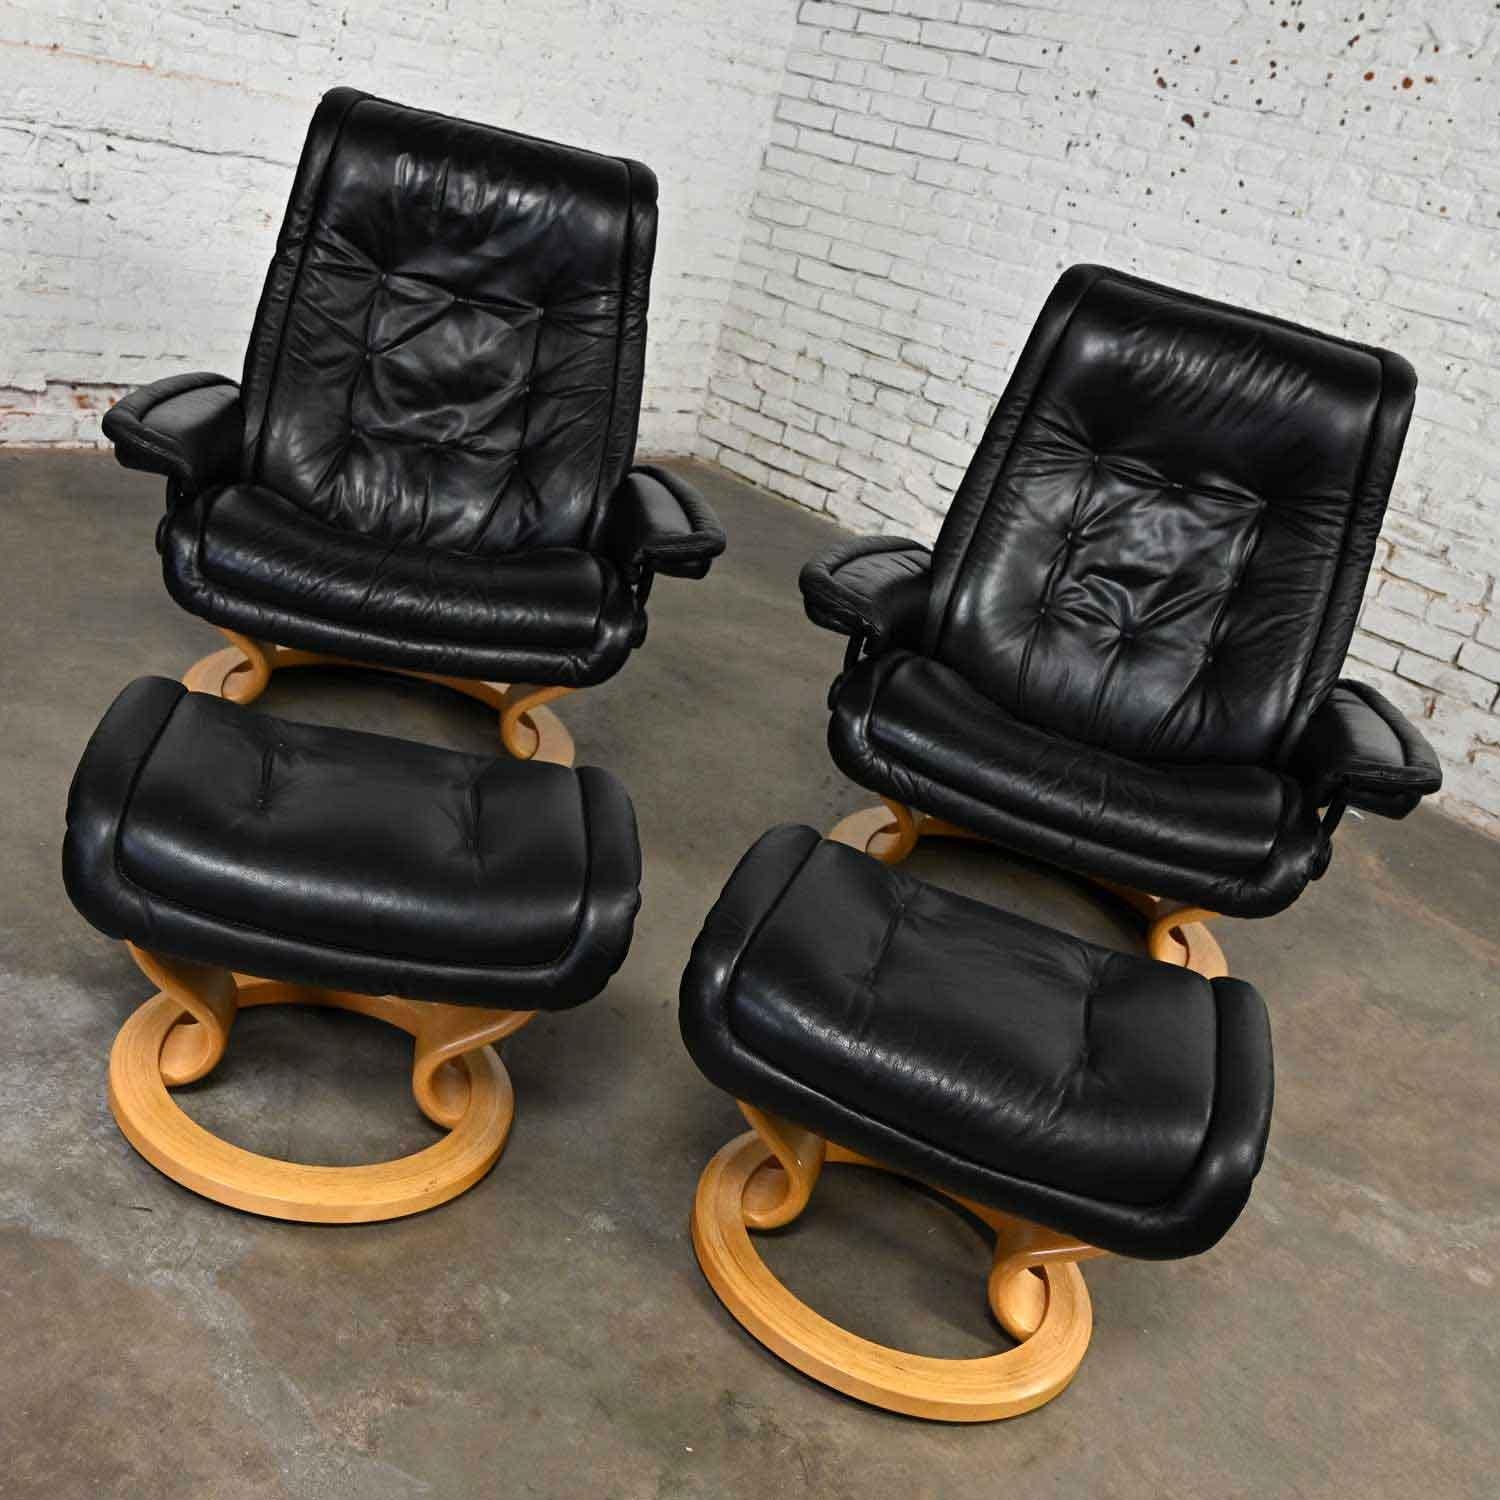 Handsome vintage Ekornes Stressless Royal Recliner black leather lounge chairs with wood bases, a pair. Beautiful condition, keeping in mind that this is vintage and not new so will have signs of use and wear. We have cleaned, polished, and